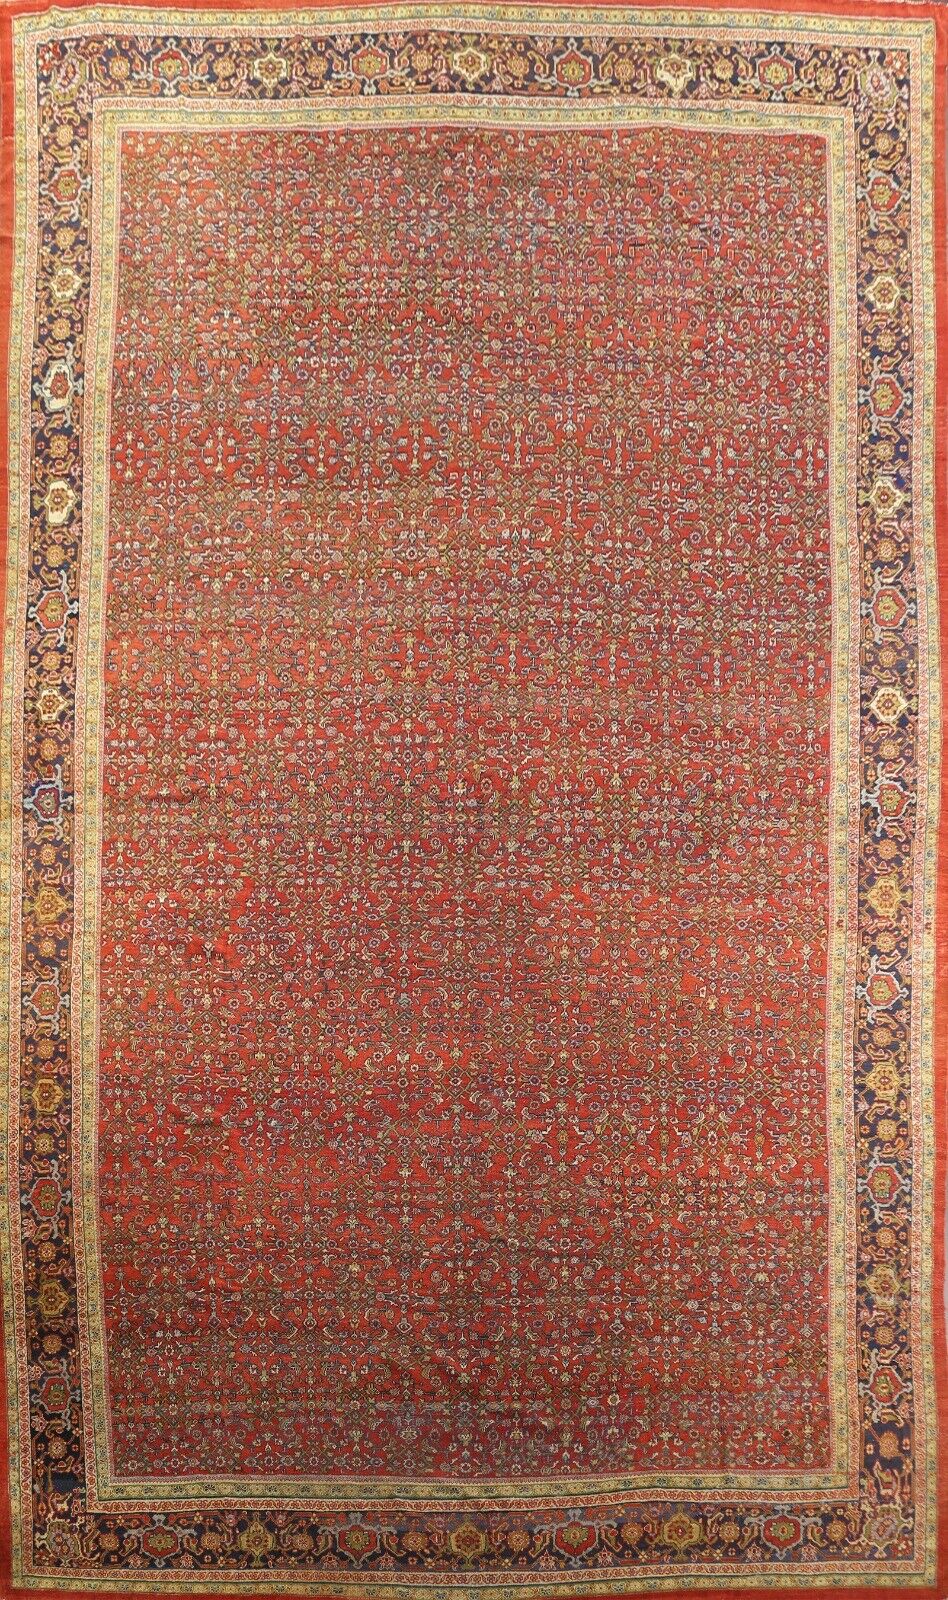 Pre-1900 Antique Vegetable Dye Sultanabad Hand-knotted Oversize Area Rug 15'x22'